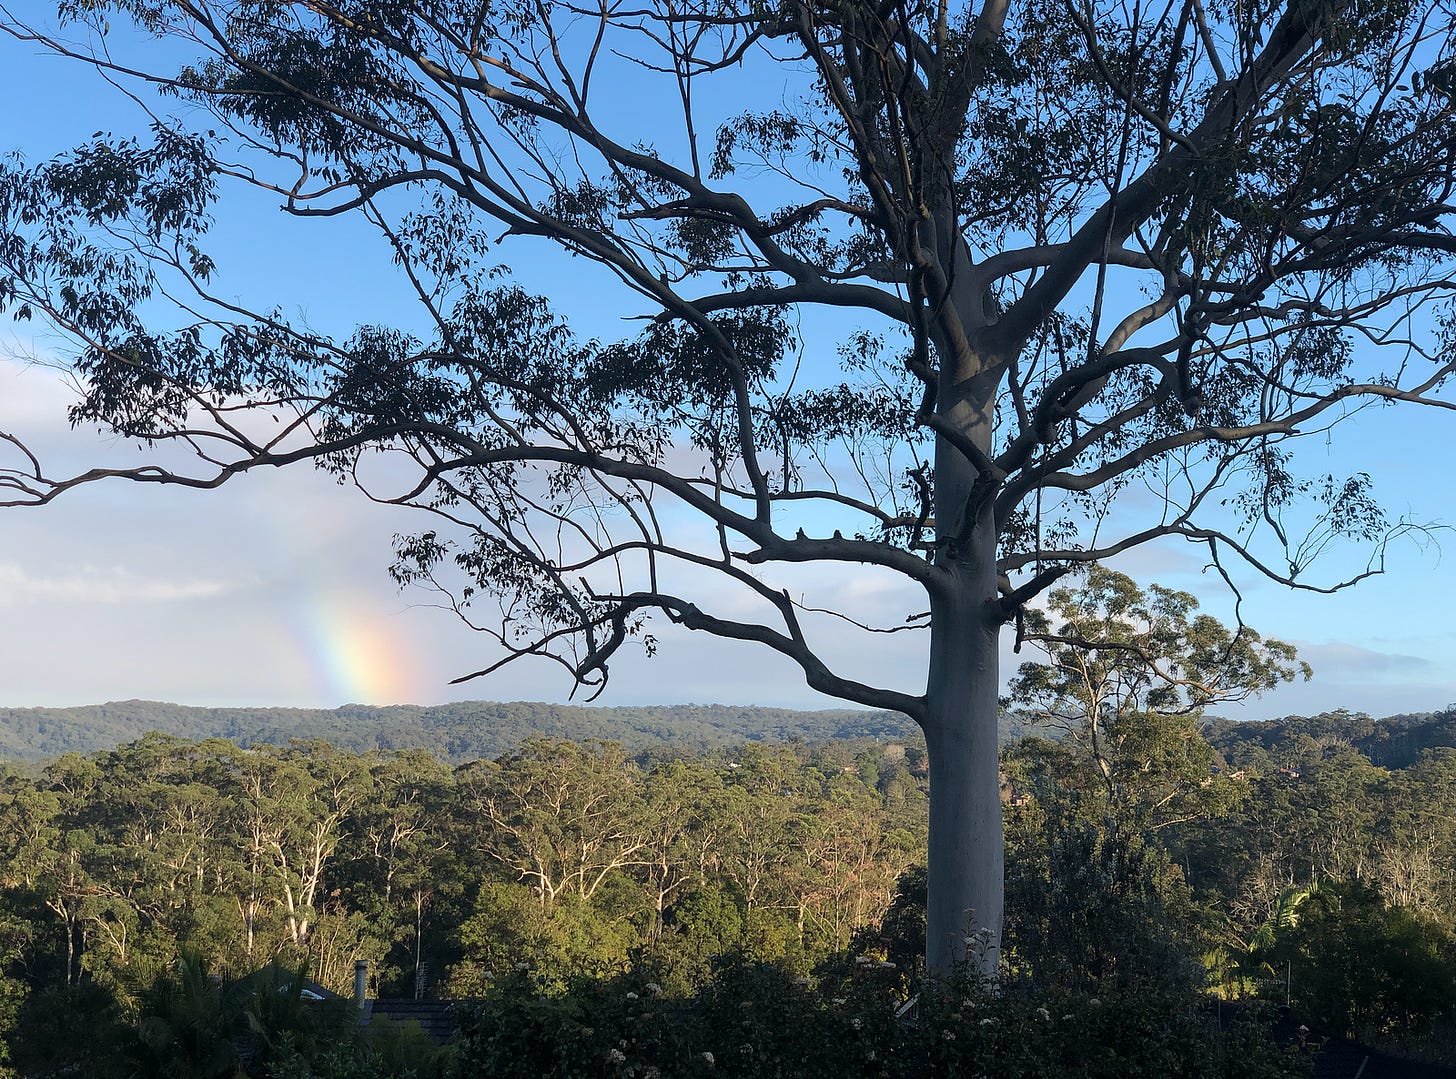 Rainbow fire on the horizon, with a large gum tree in the foreground